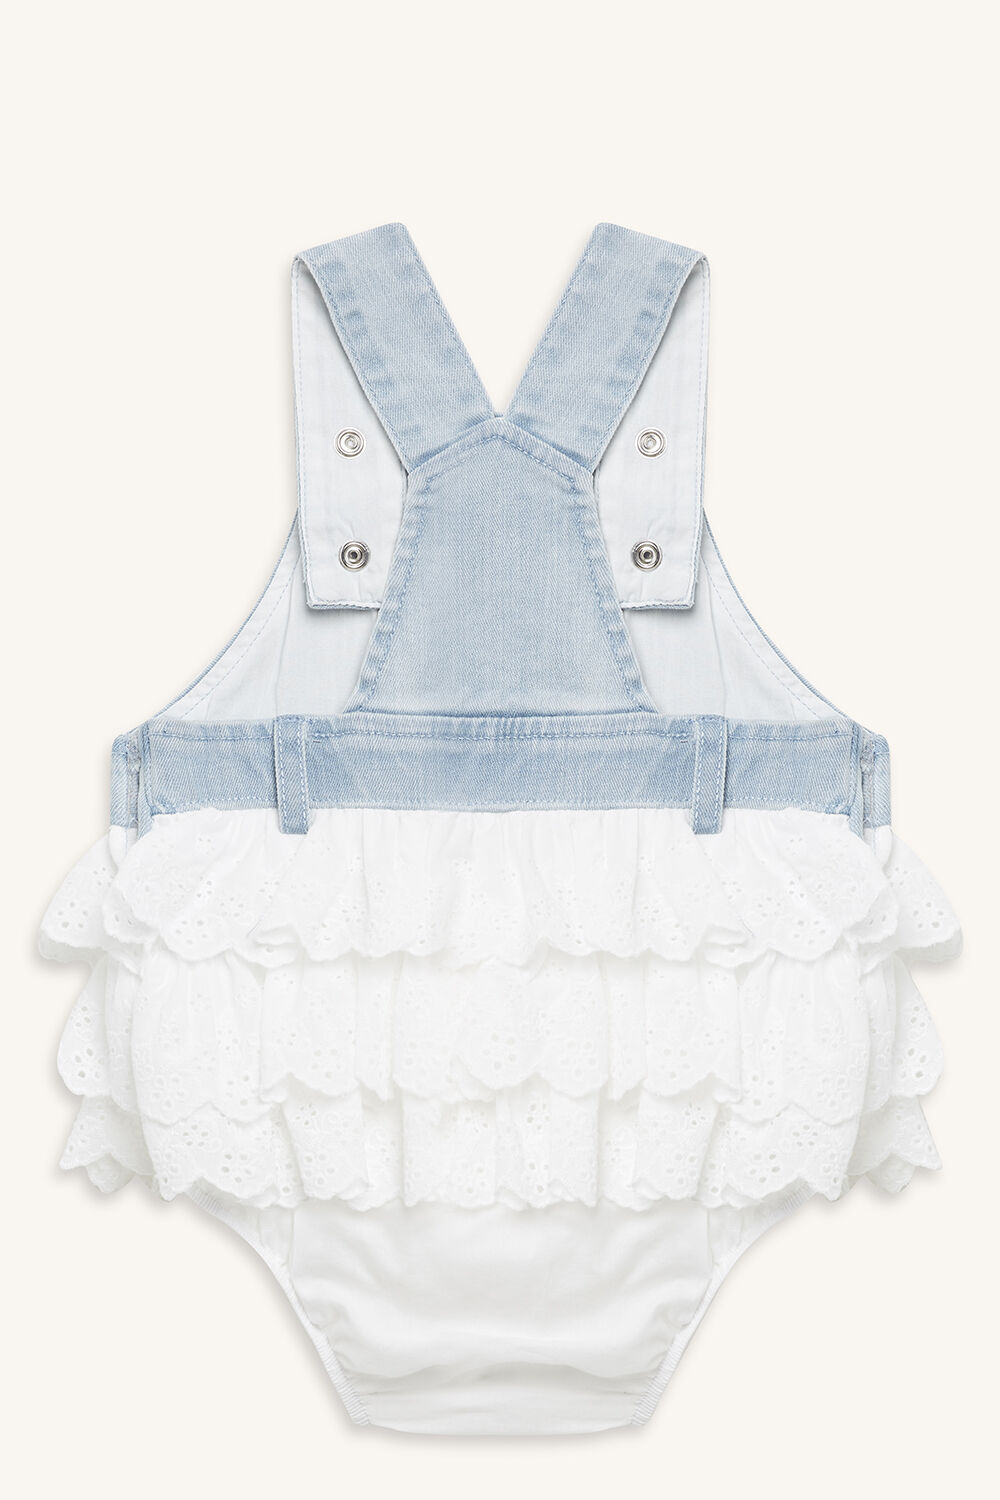 JUNIOR GIRL LACE OVERALL GROW in colour DRESS BLUES